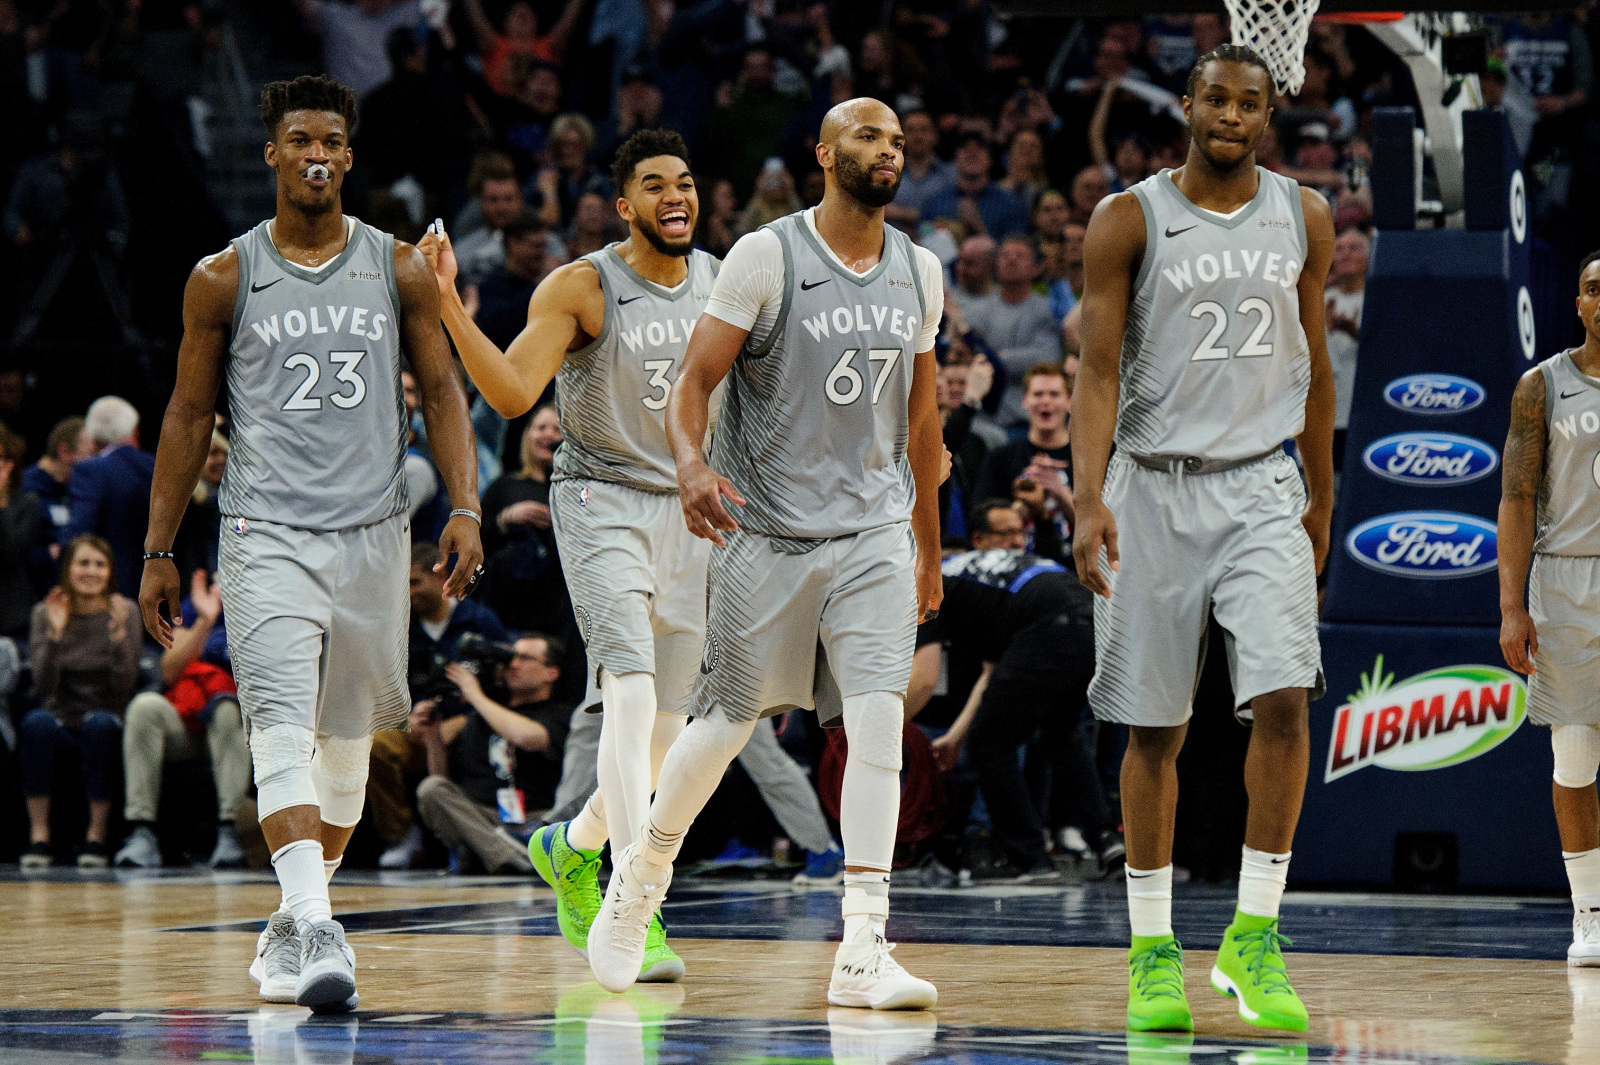 Timberwolves City Edition: Cut From a Different Cloth - Boardroom